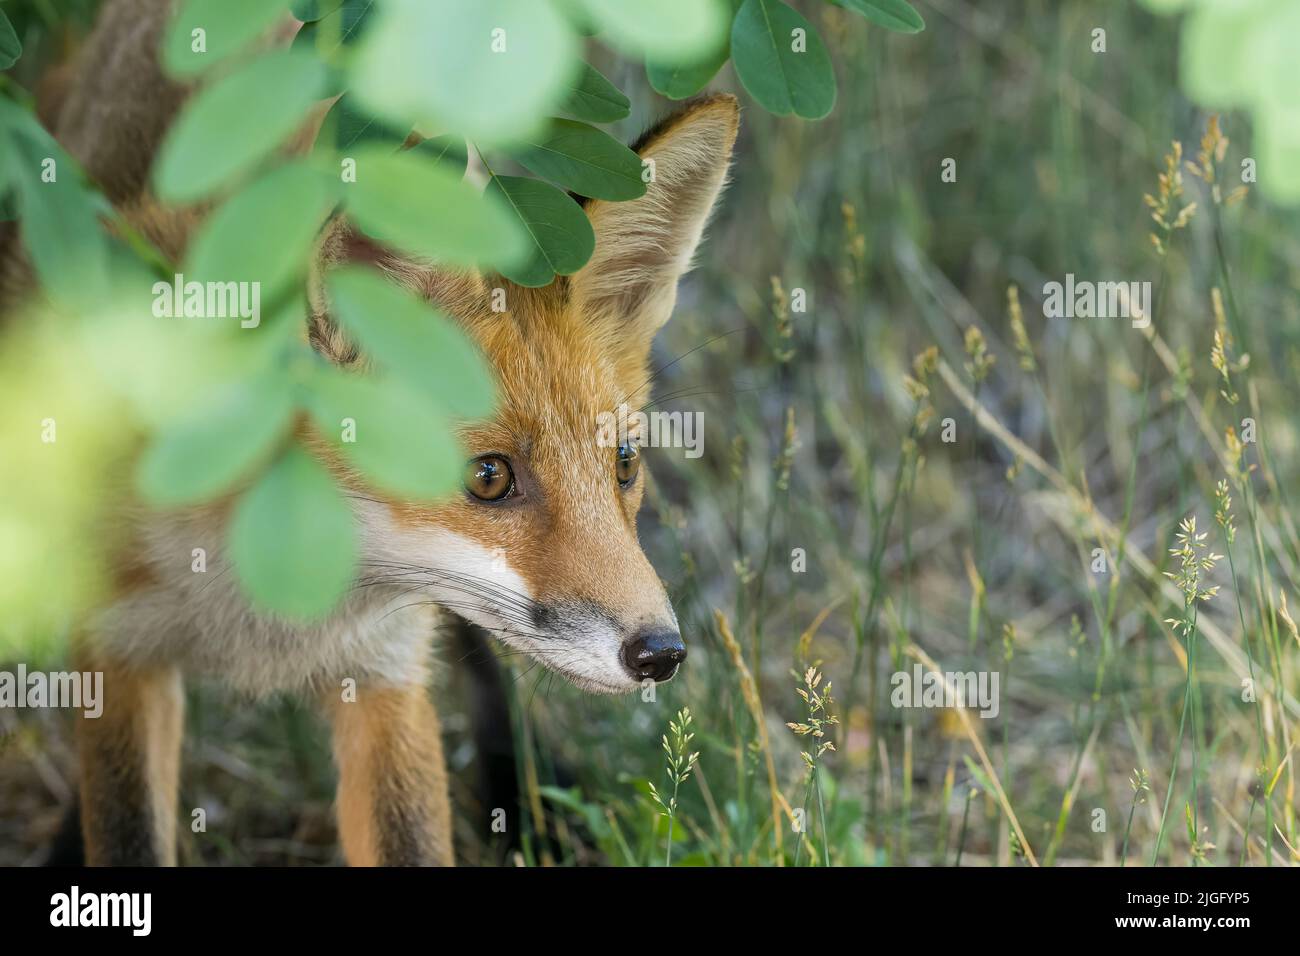 A young fox looks curiously Stock Photo